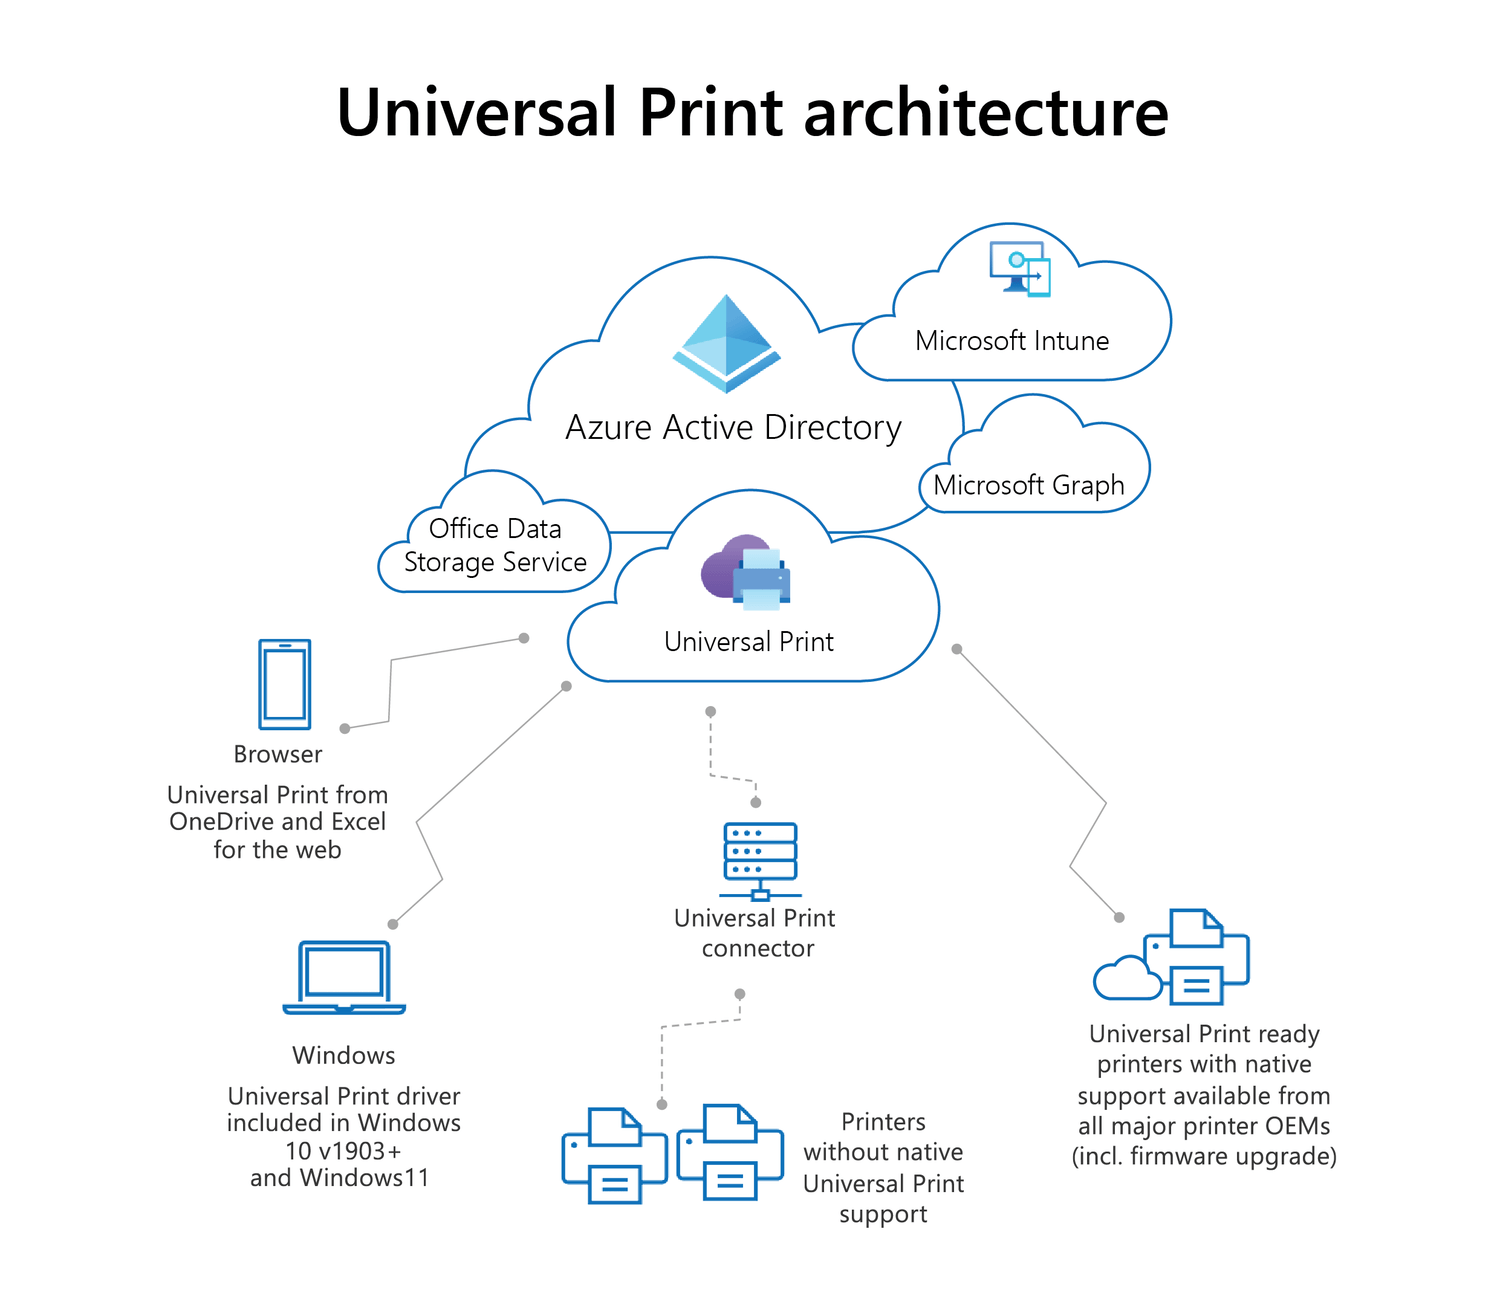 Universal Print diagram showing Microsoft Azure Active Directory, Microsoft Intune, Microsoft Graph, and Office Data Storage Services at the center with the browser, Windows, and printers dispersed from there.